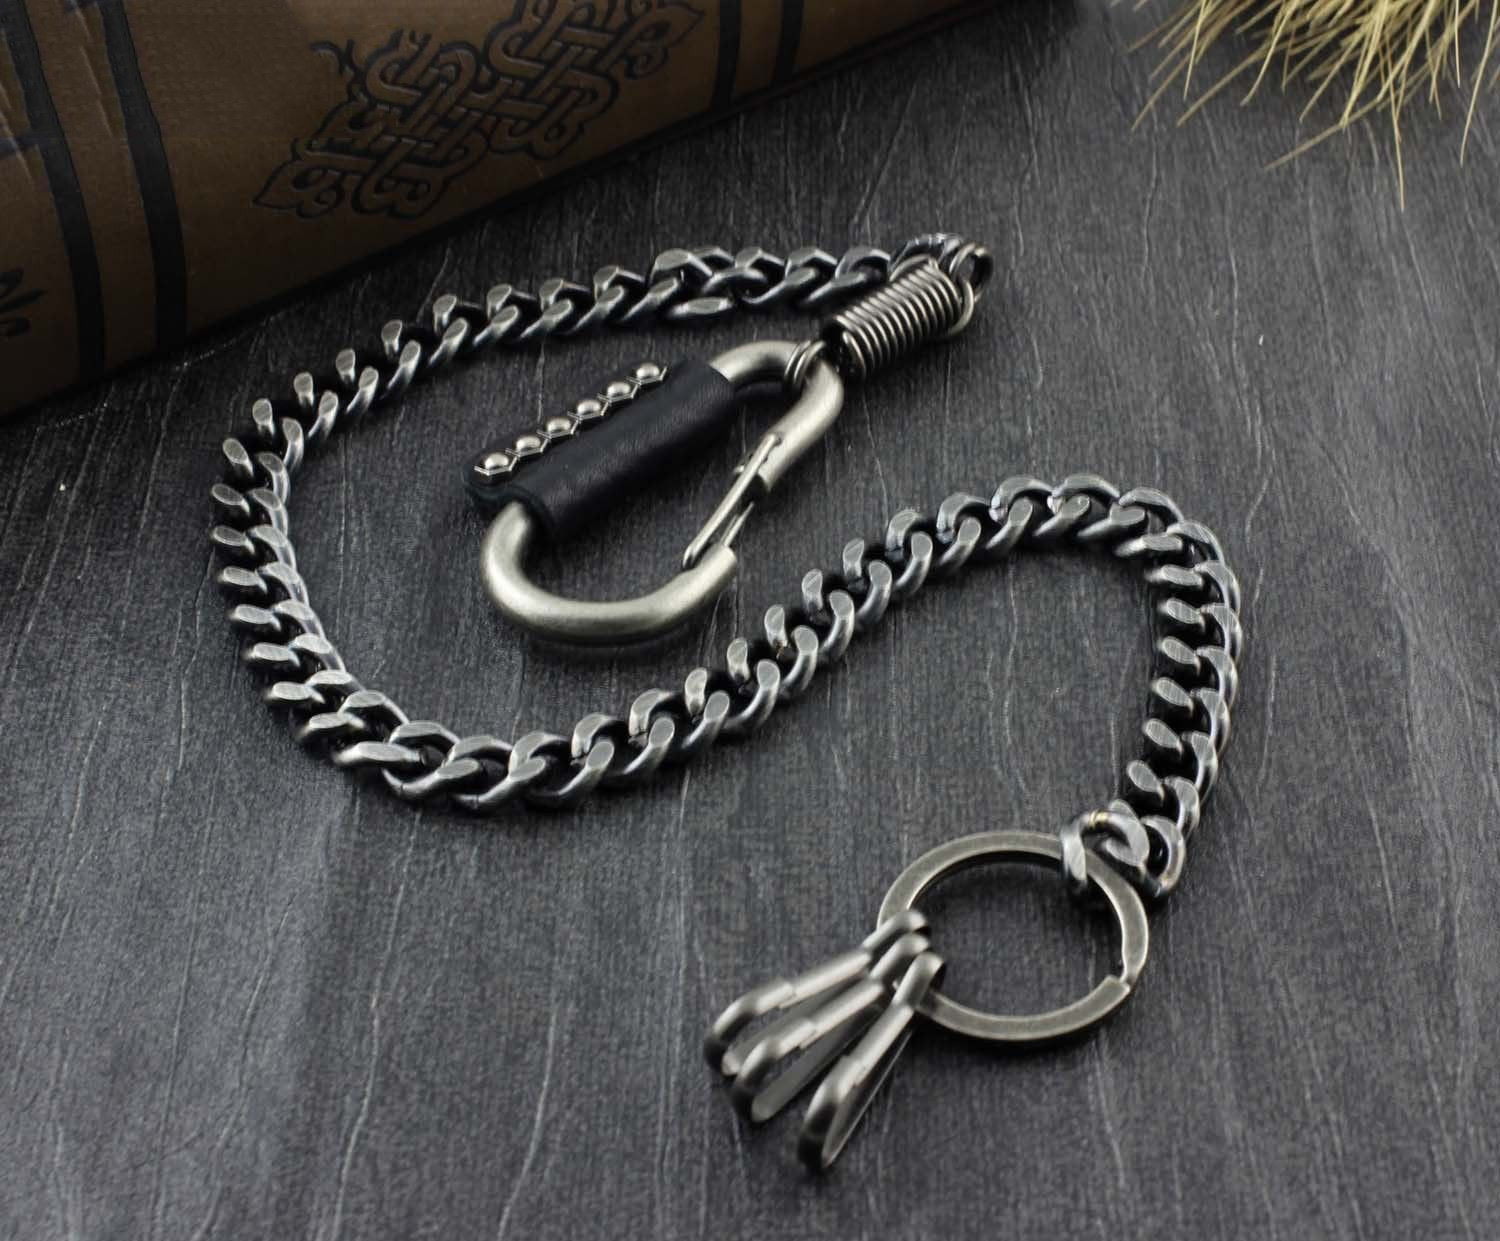 BADASS SILVER STAINLESS STEEL MENS KEY CHAINs CHAIN PANTS CHAIN WALLET CHAIN FOR MEN